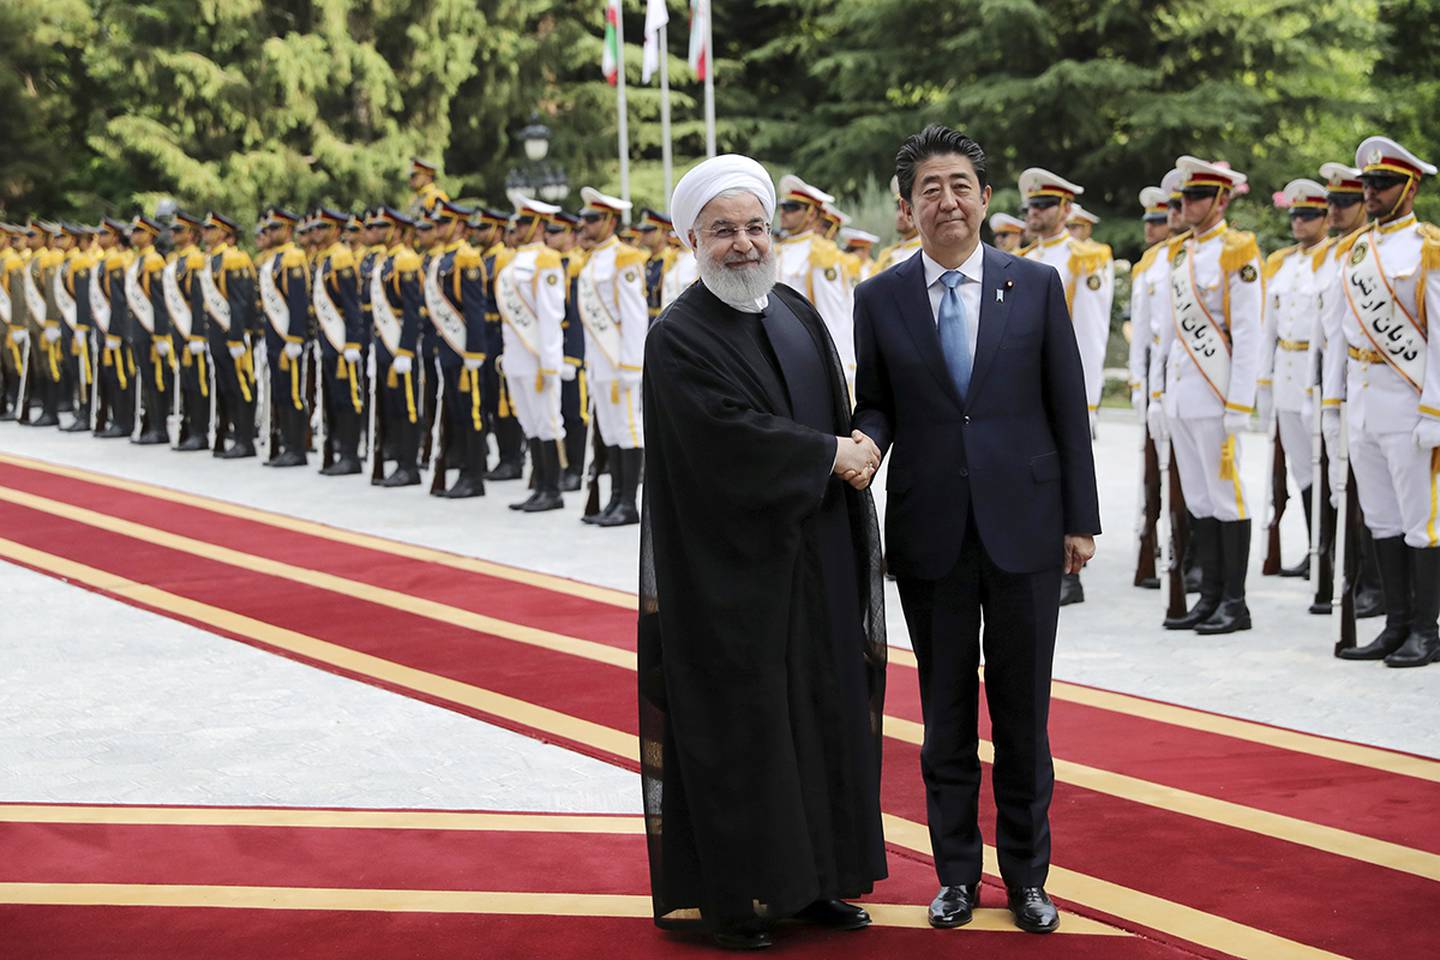 Japanese Prime Minister Shinzo Abe, center, shakes hands for the cameras with Iranian President Hassan Rouhani